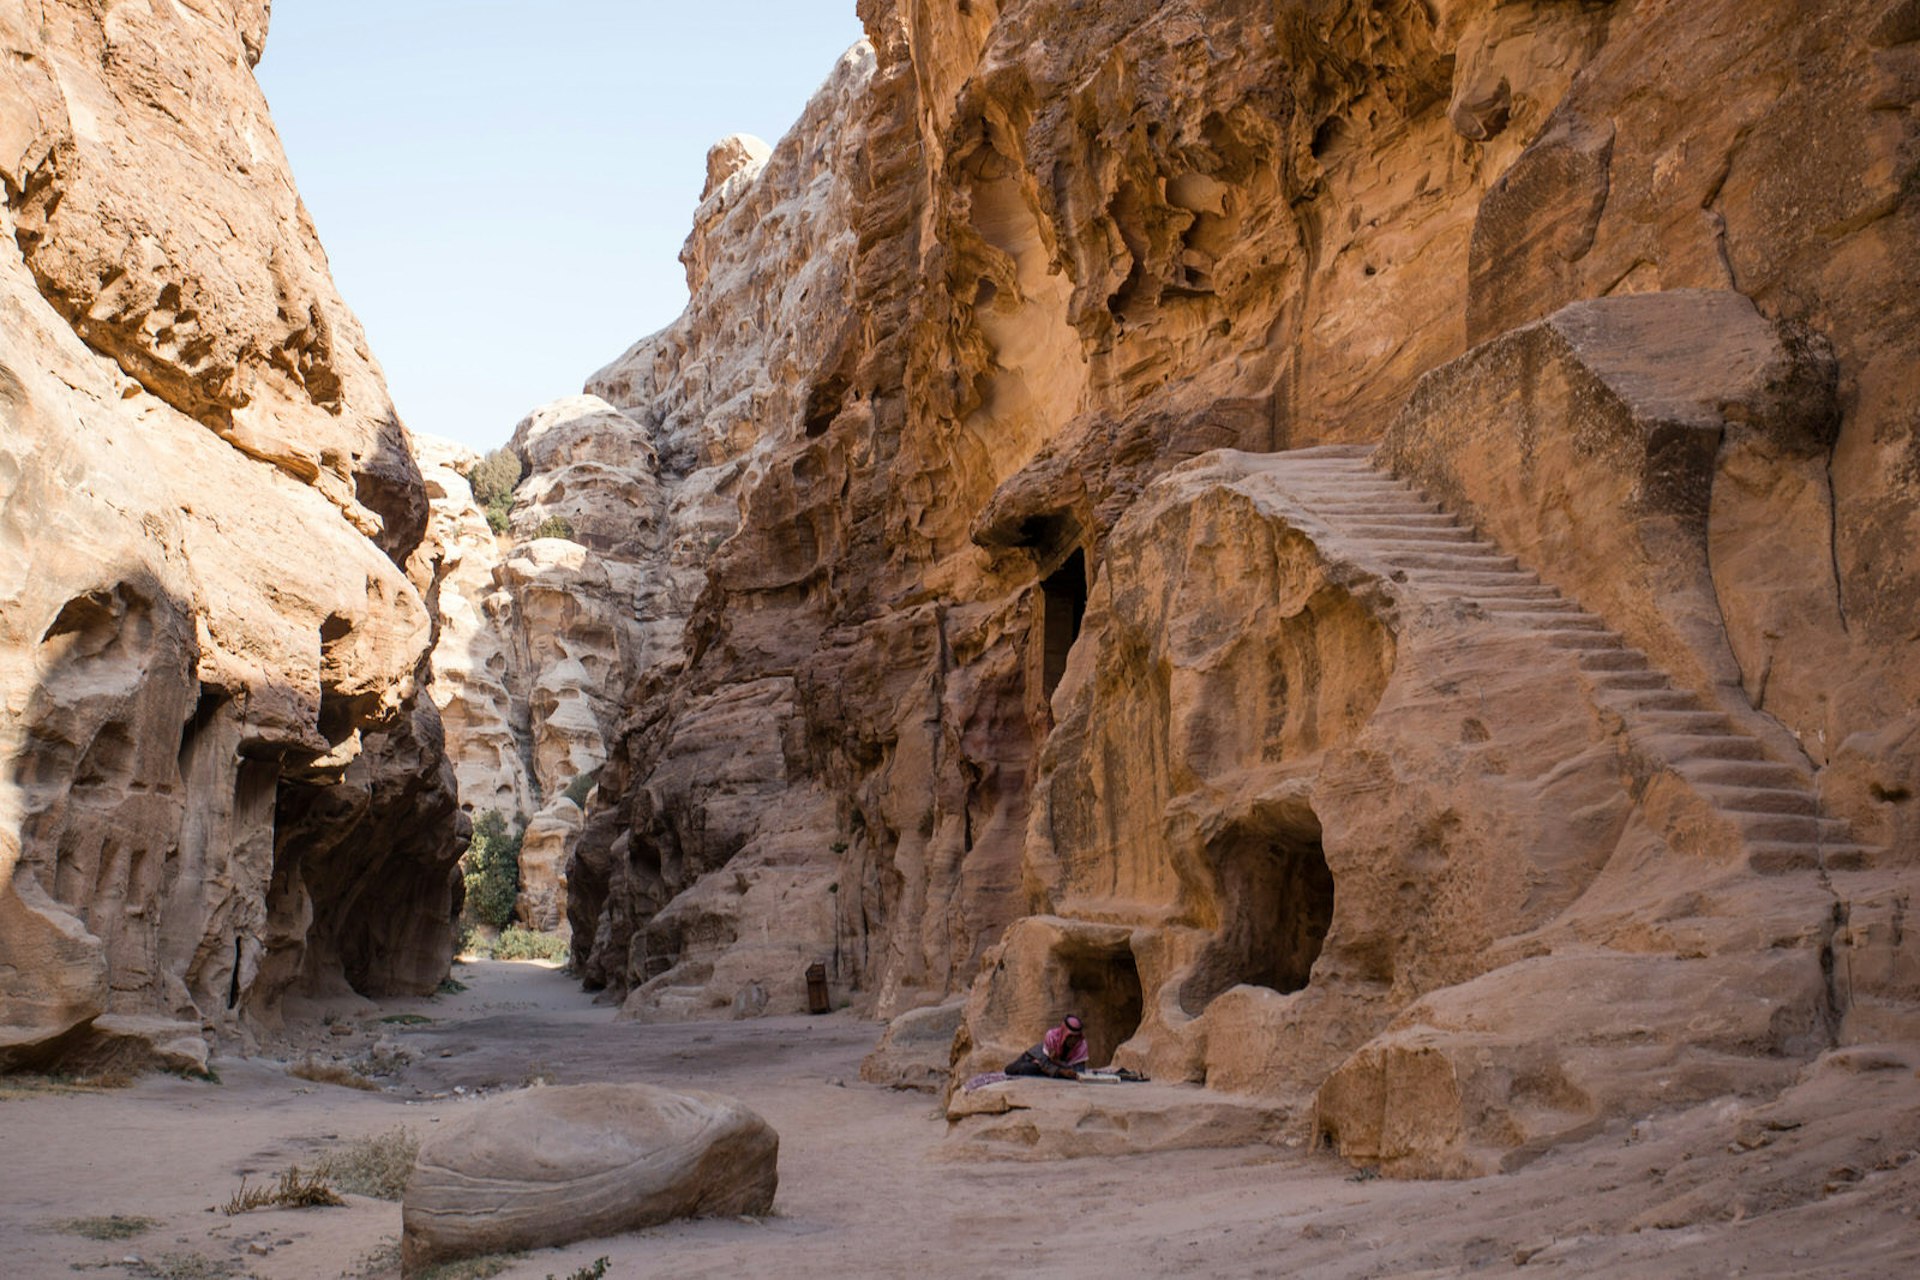 Stairs at Little Petra, Jordan. Image by Stephen Lioy / Lonely Planet